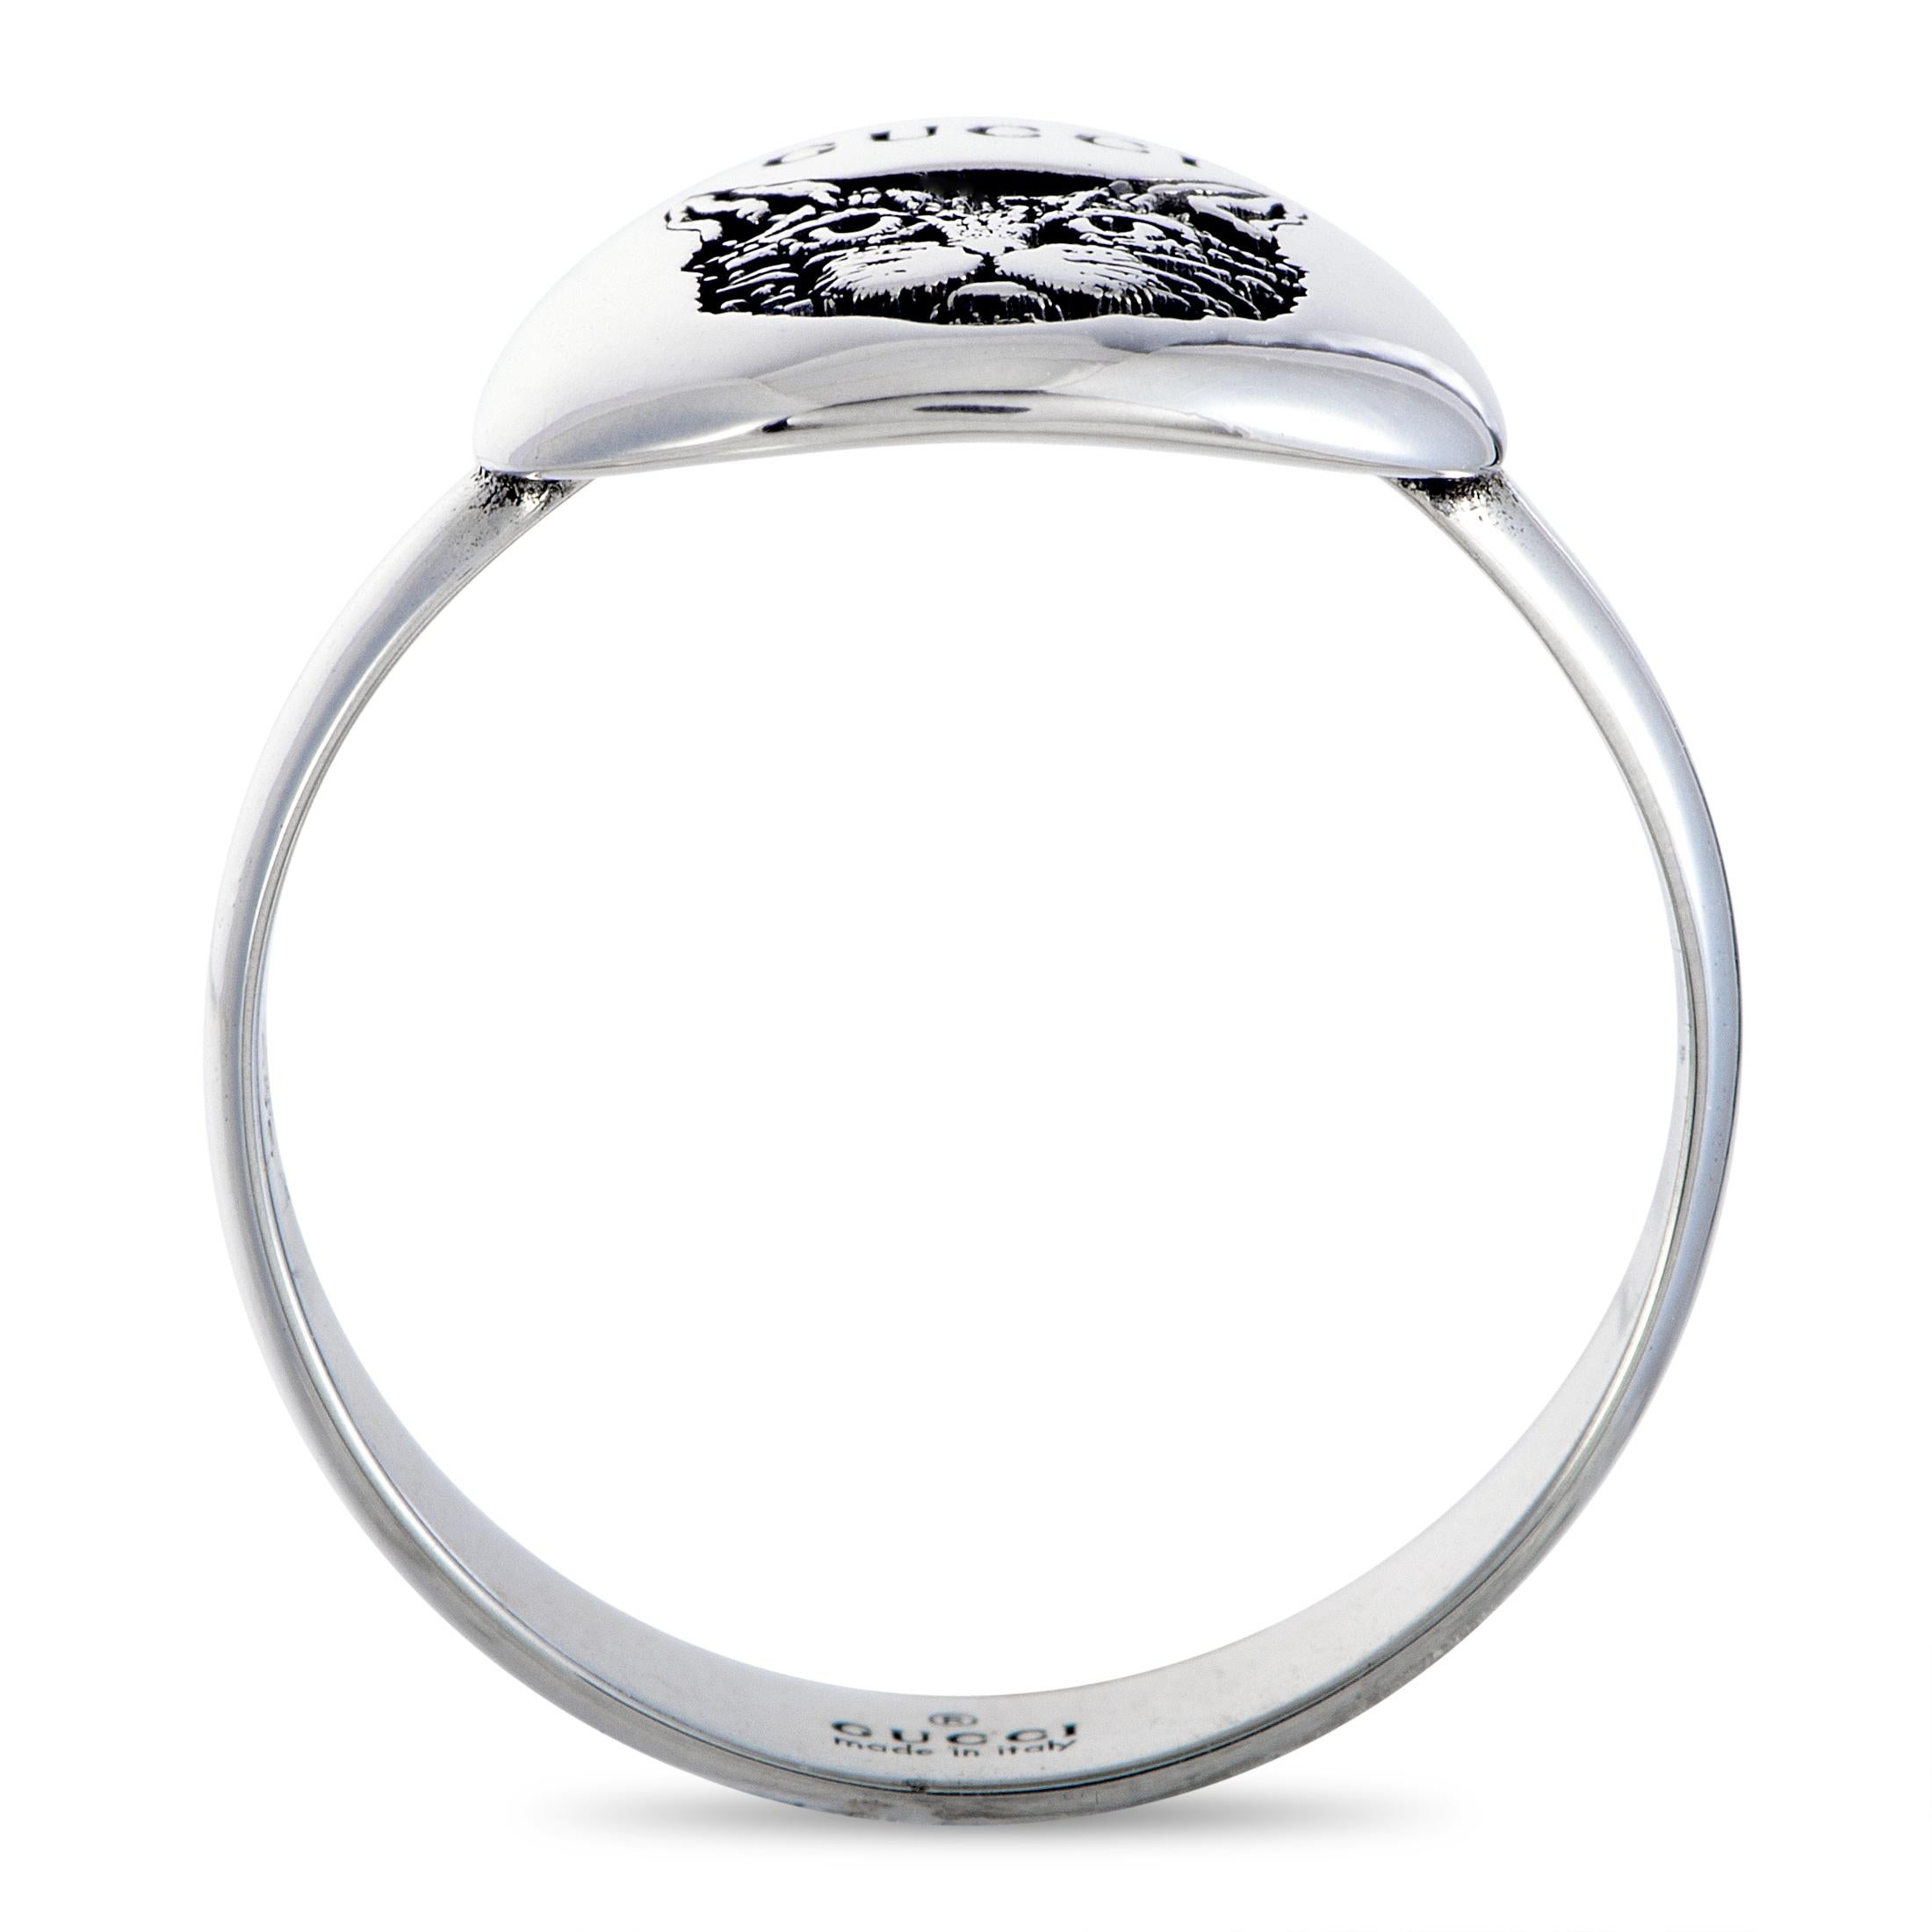 The Gucci “Blind For Love” ring is crafted from silver and weighs 2.8 grams. The ring boasts band thickness of 3 mm and top height of 2 mm, while top dimensions measure 12 by 12 mm.
 
 This item is offered in brand new condition and includes the